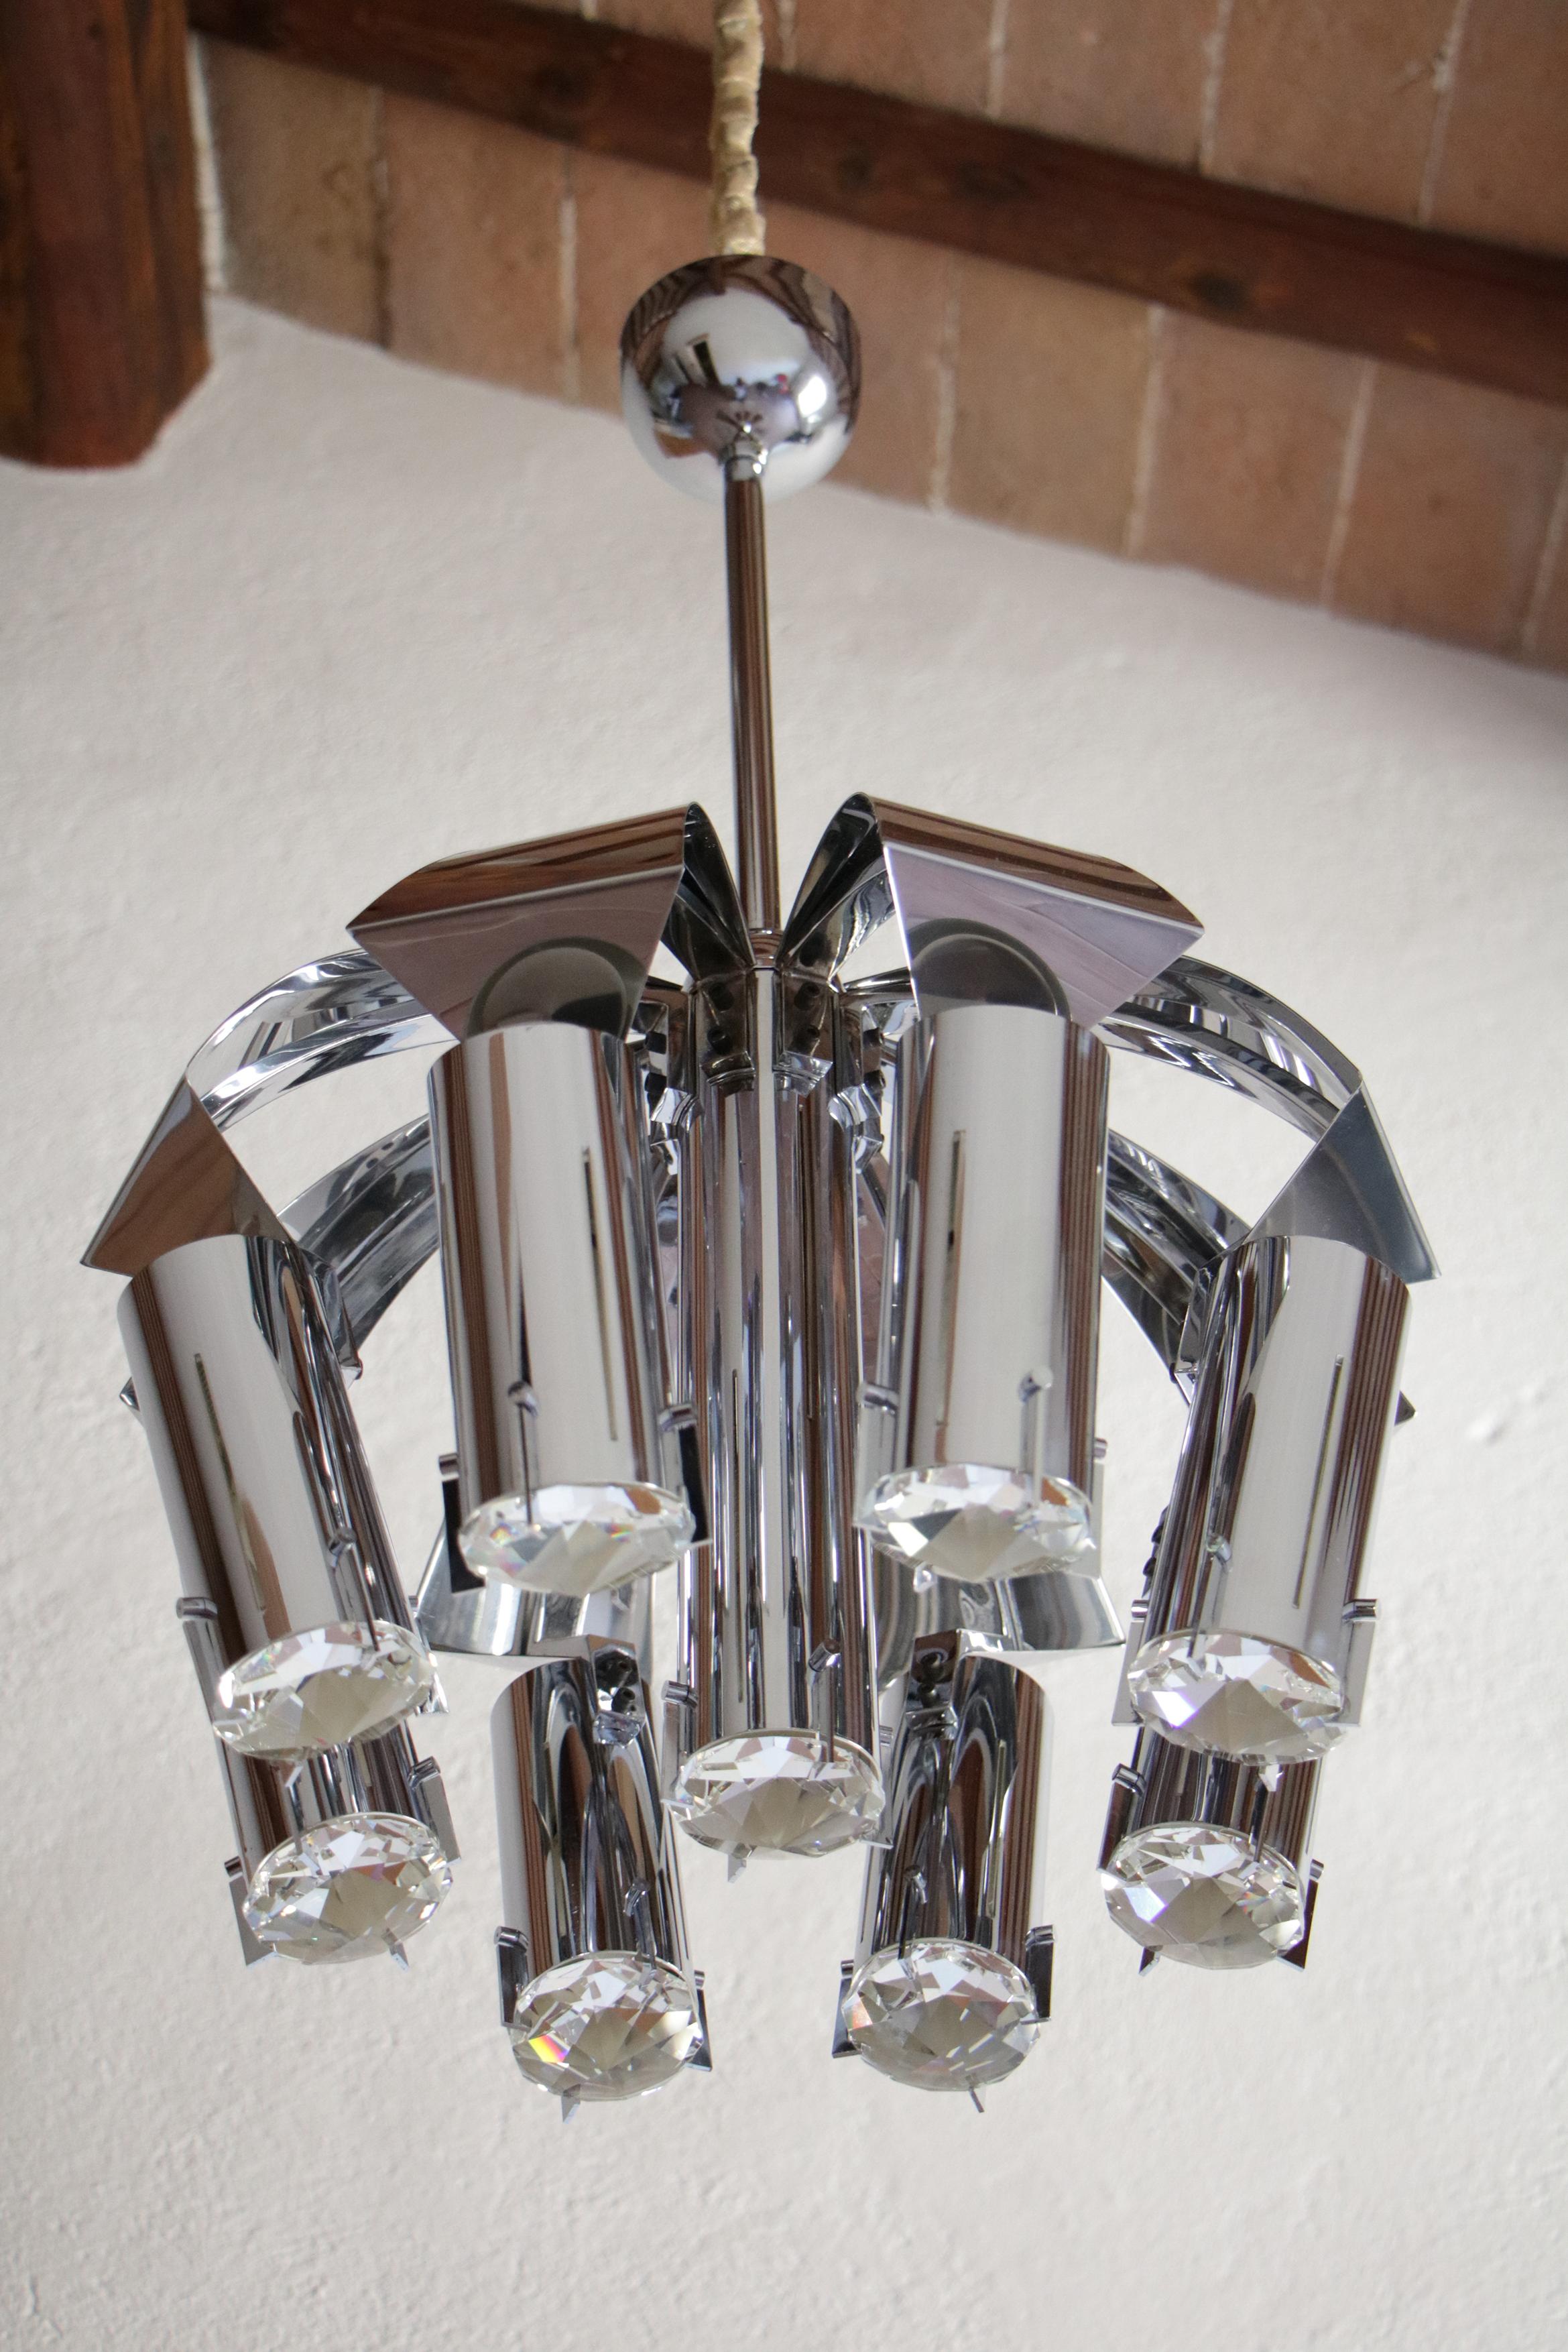 Space Age Chromed Chandelier Pendant Ceiling Lamp Attributed to Goffredo Reggiani, 1970s For Sale